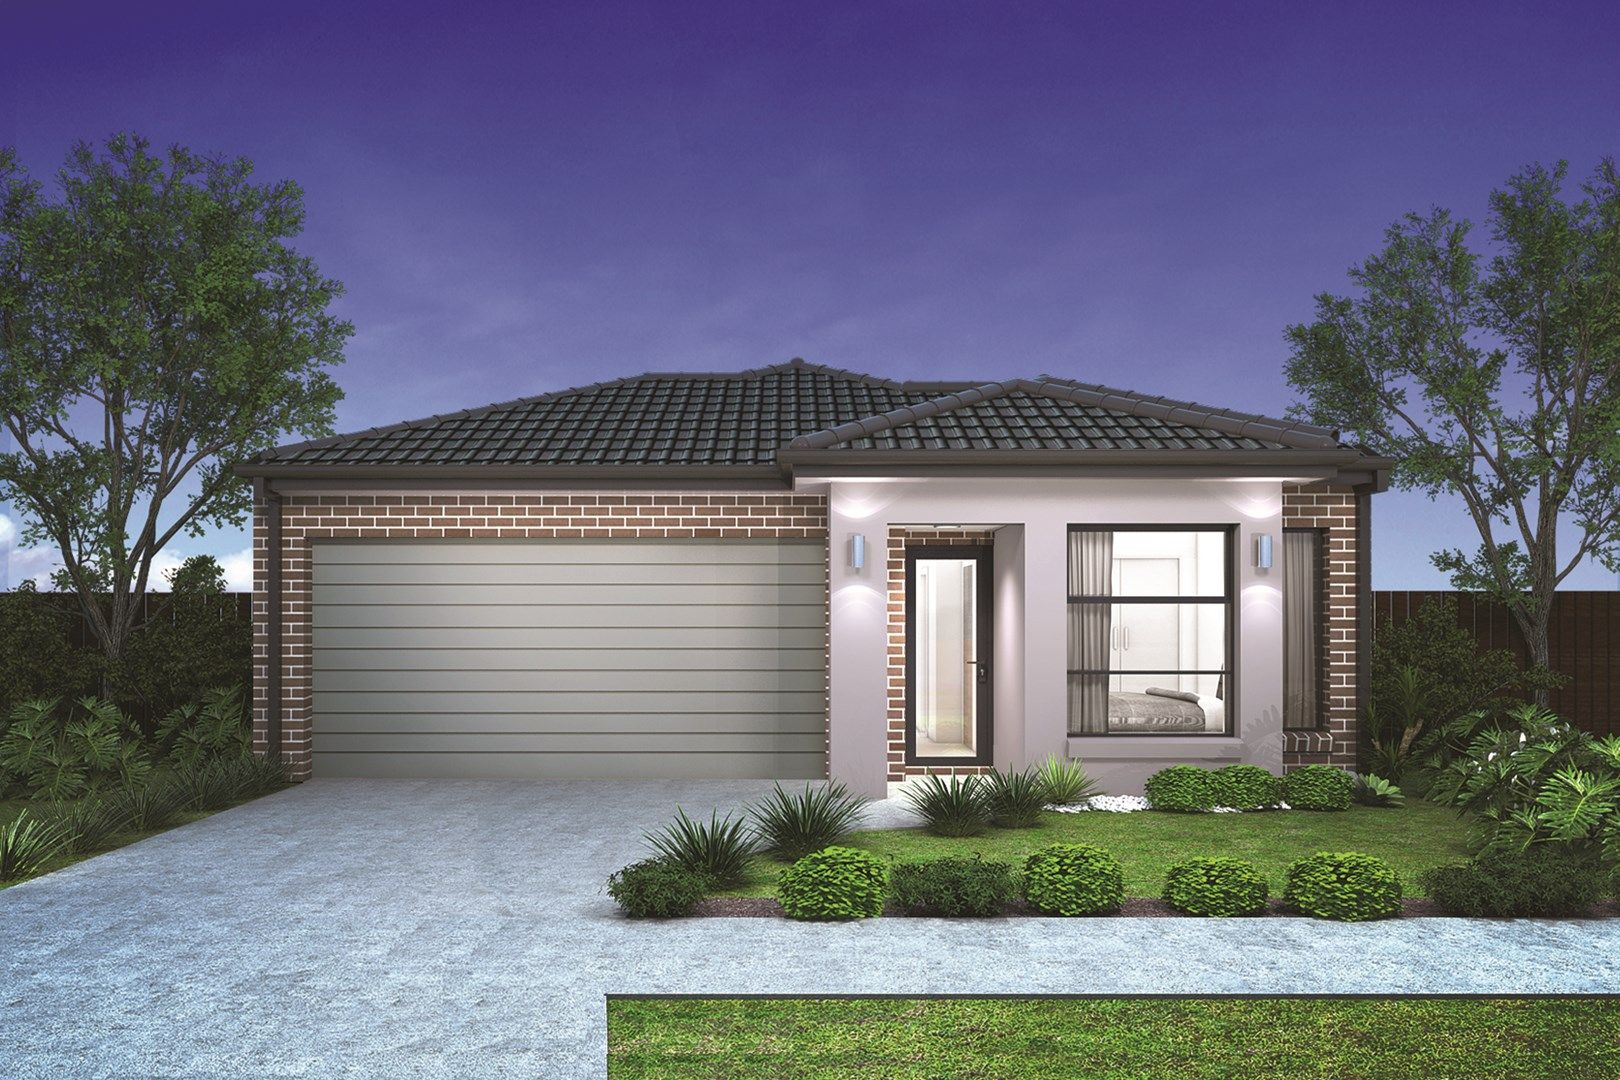 3 bedrooms New House & Land in Lot 2153 Mangioni Drive DEANSIDE VIC, 3336